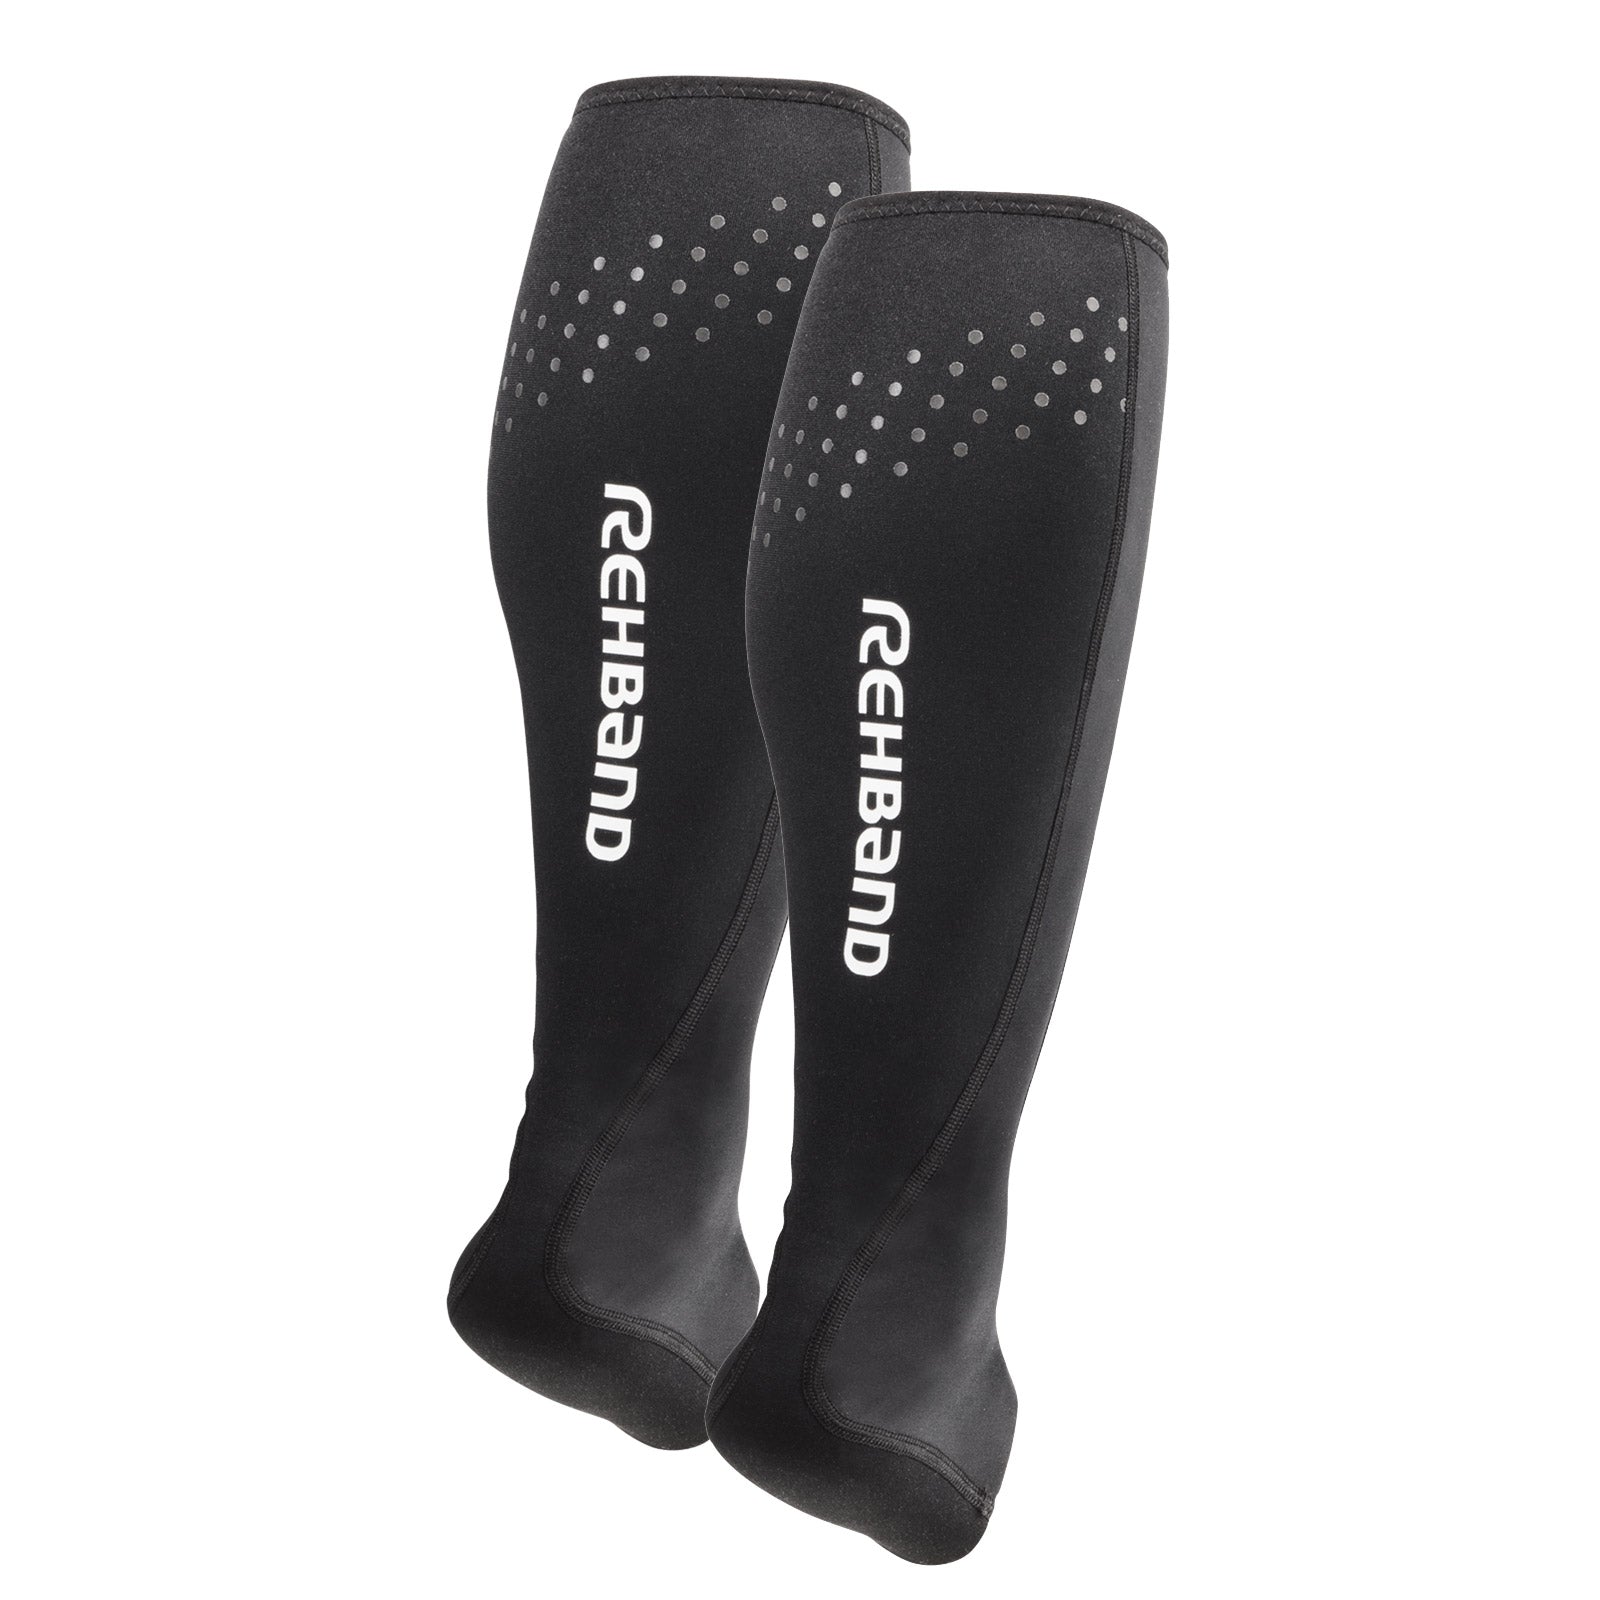 Two black achilles/calf sleeves with a whtite Rehband lettering at the back